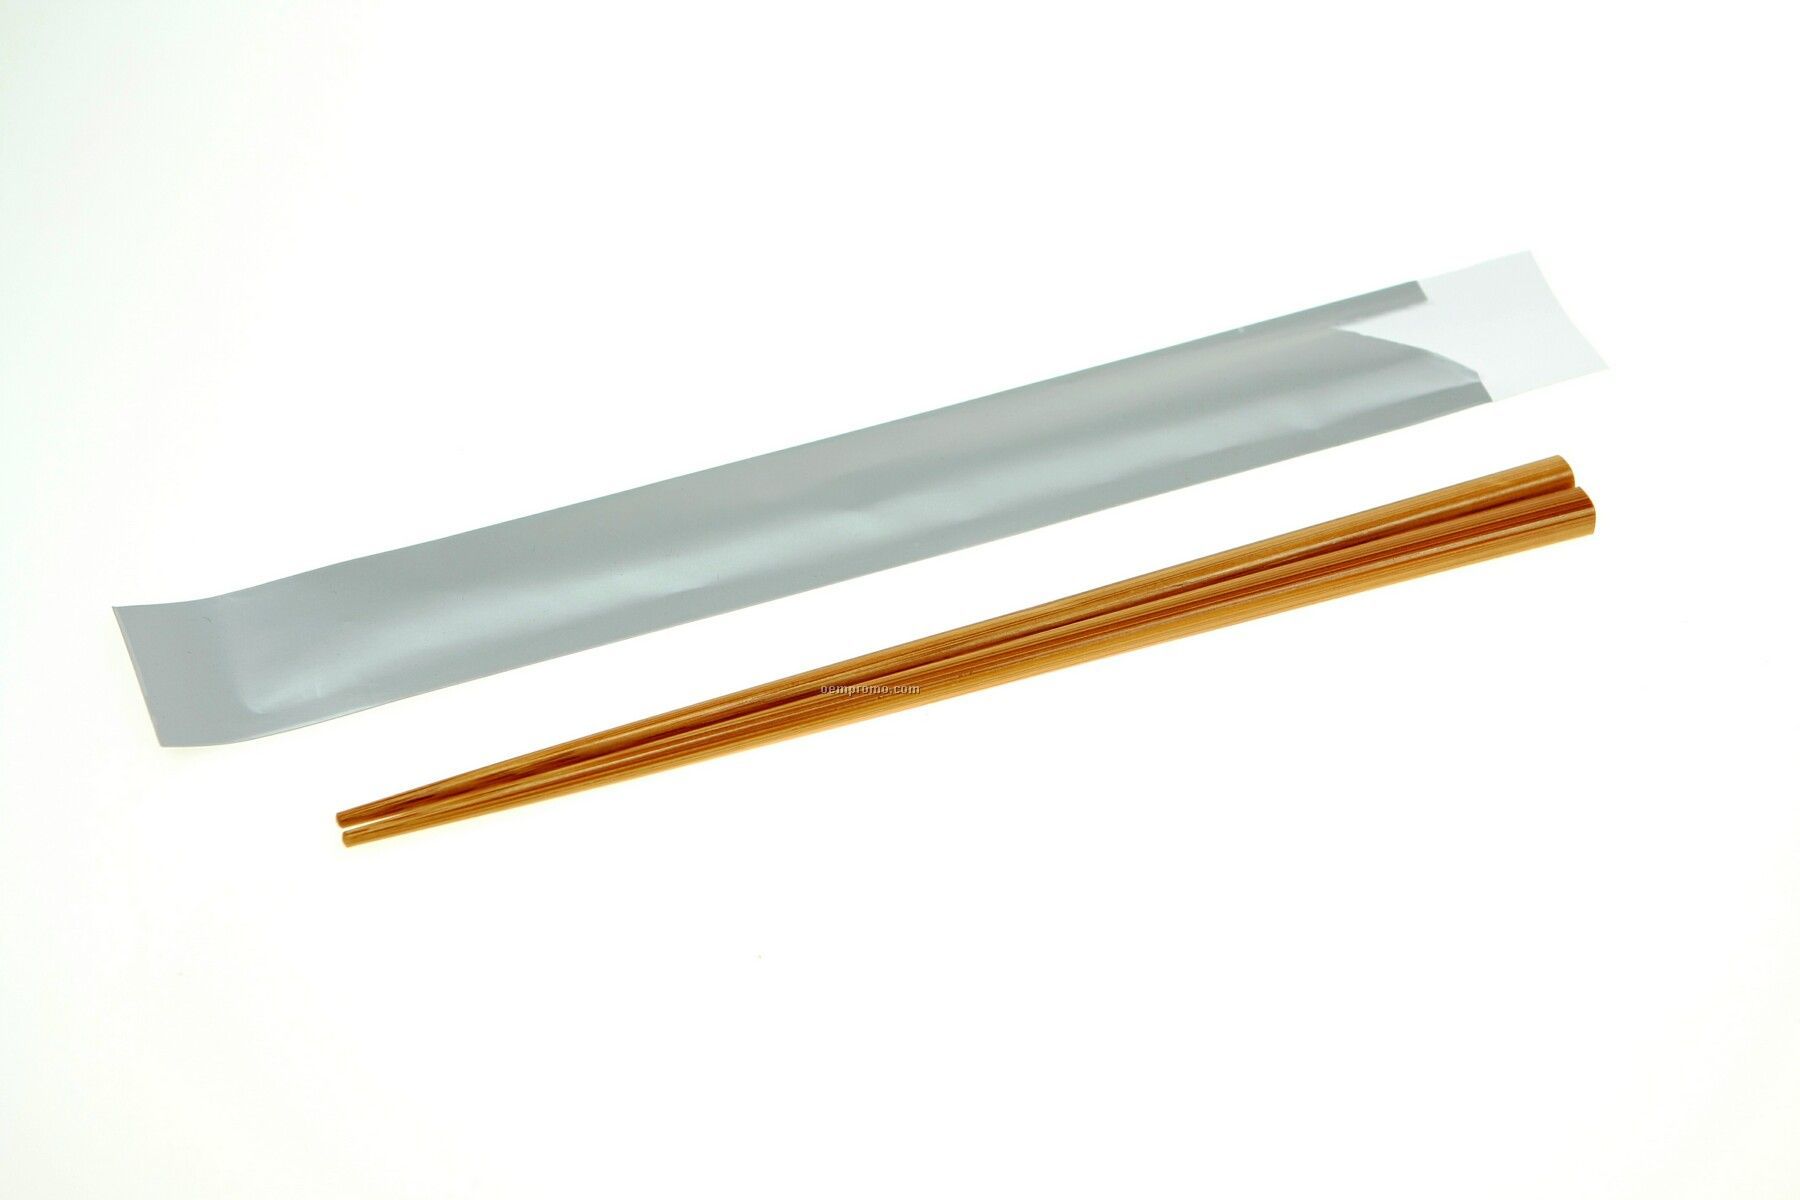 Lowest Price On The Market- Bamboo Chopsticks In Silver Paper Pouch